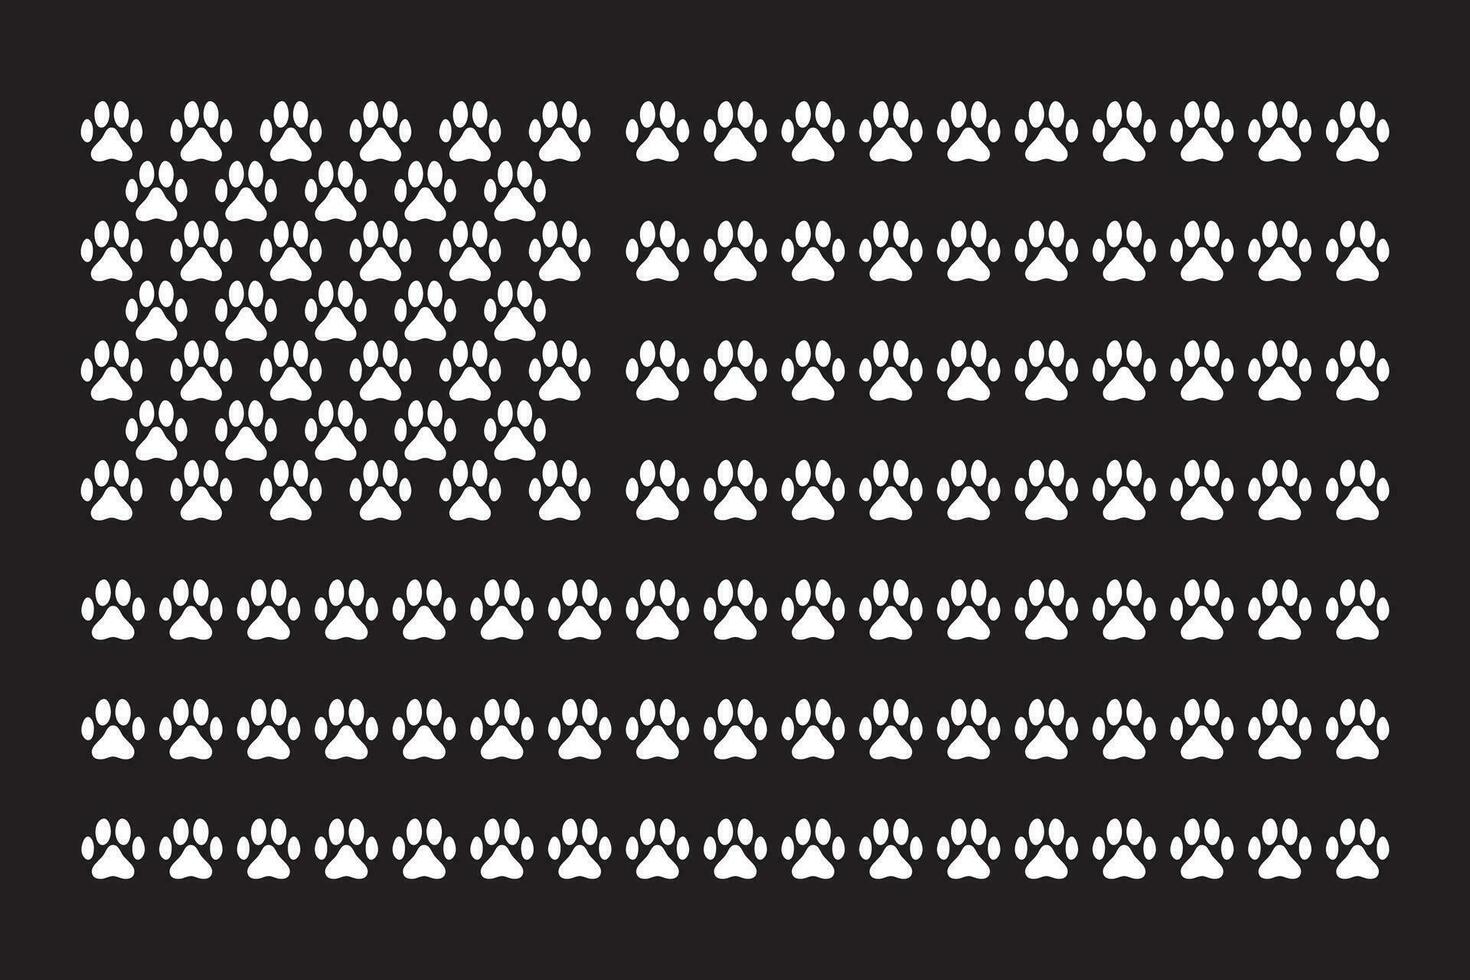 Made out of paw prints, the American flag vector